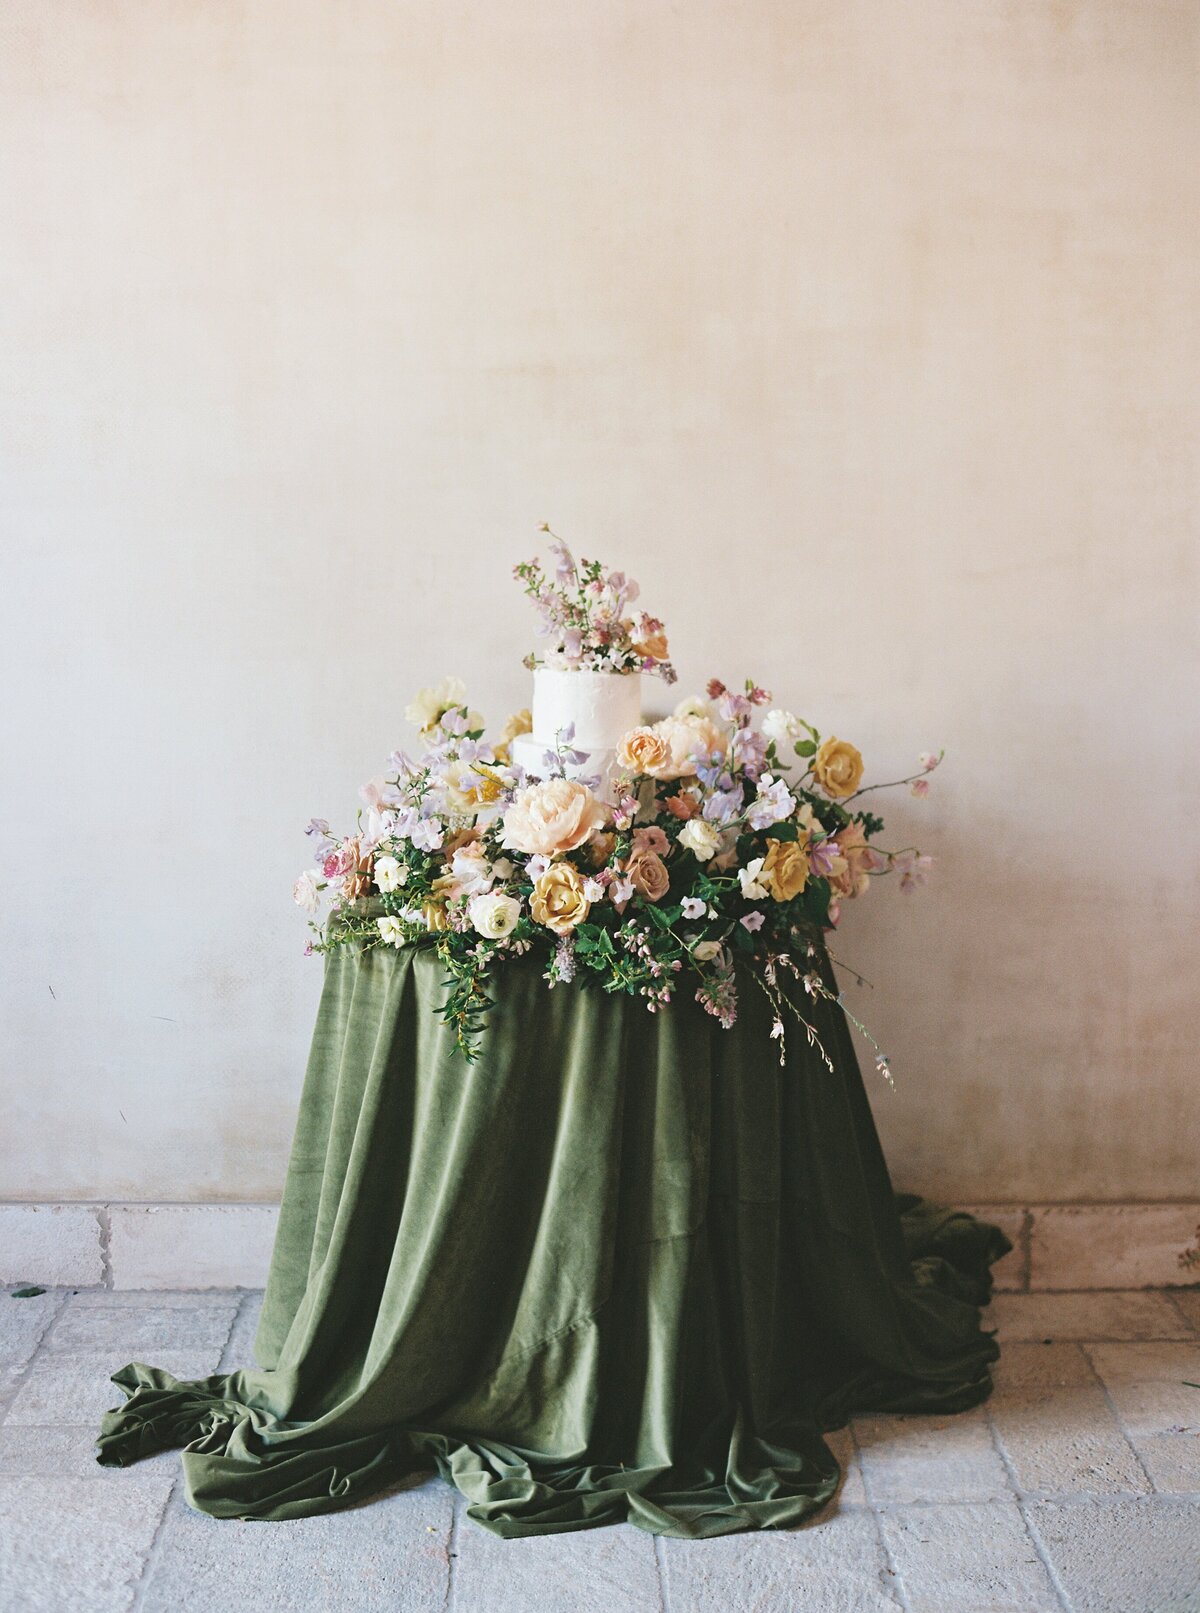 small white wedding cake surrounded by flowers and a dark green table cloth